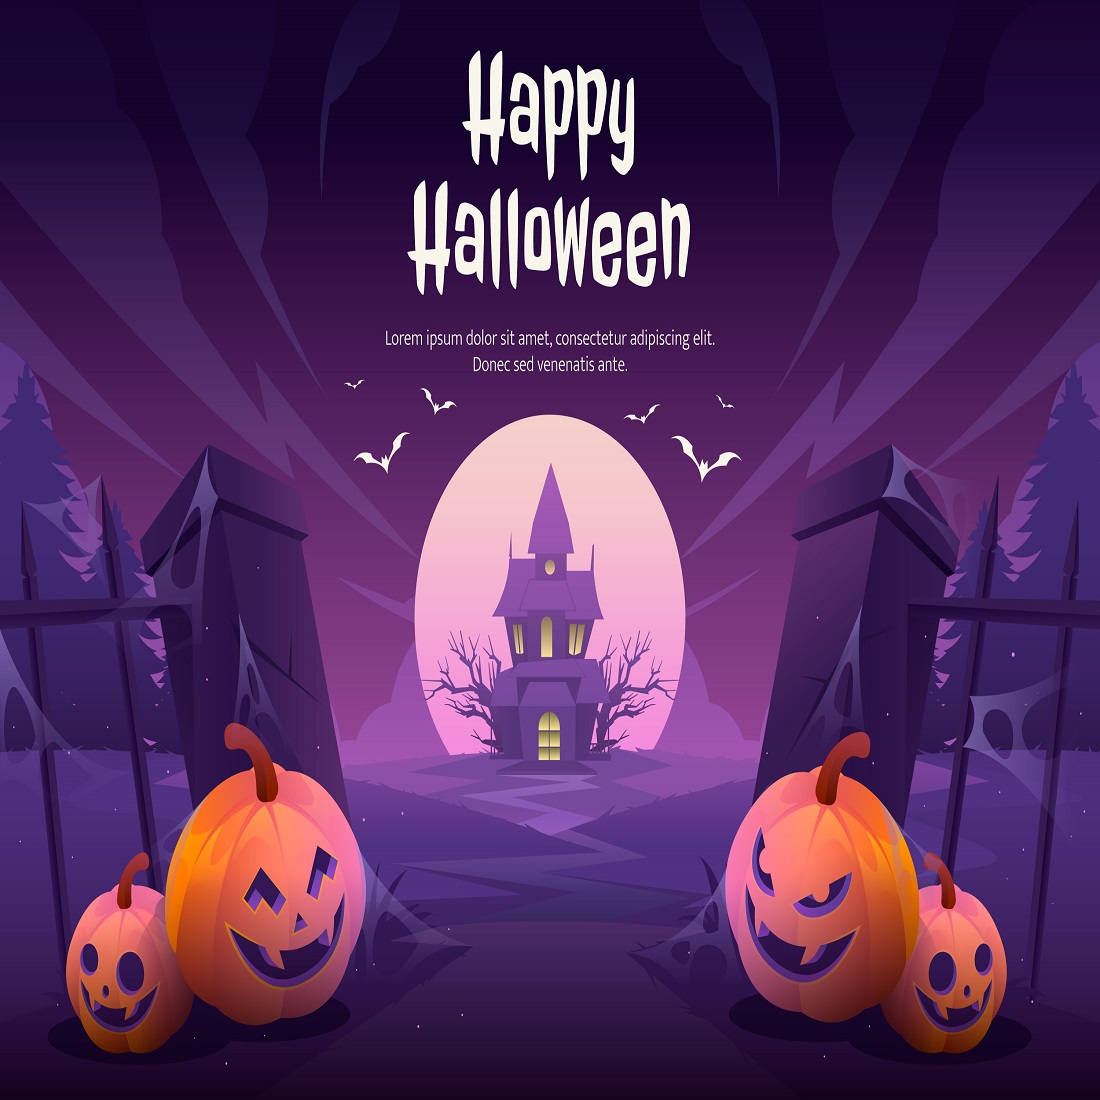 Gradient Halloween background preview image.